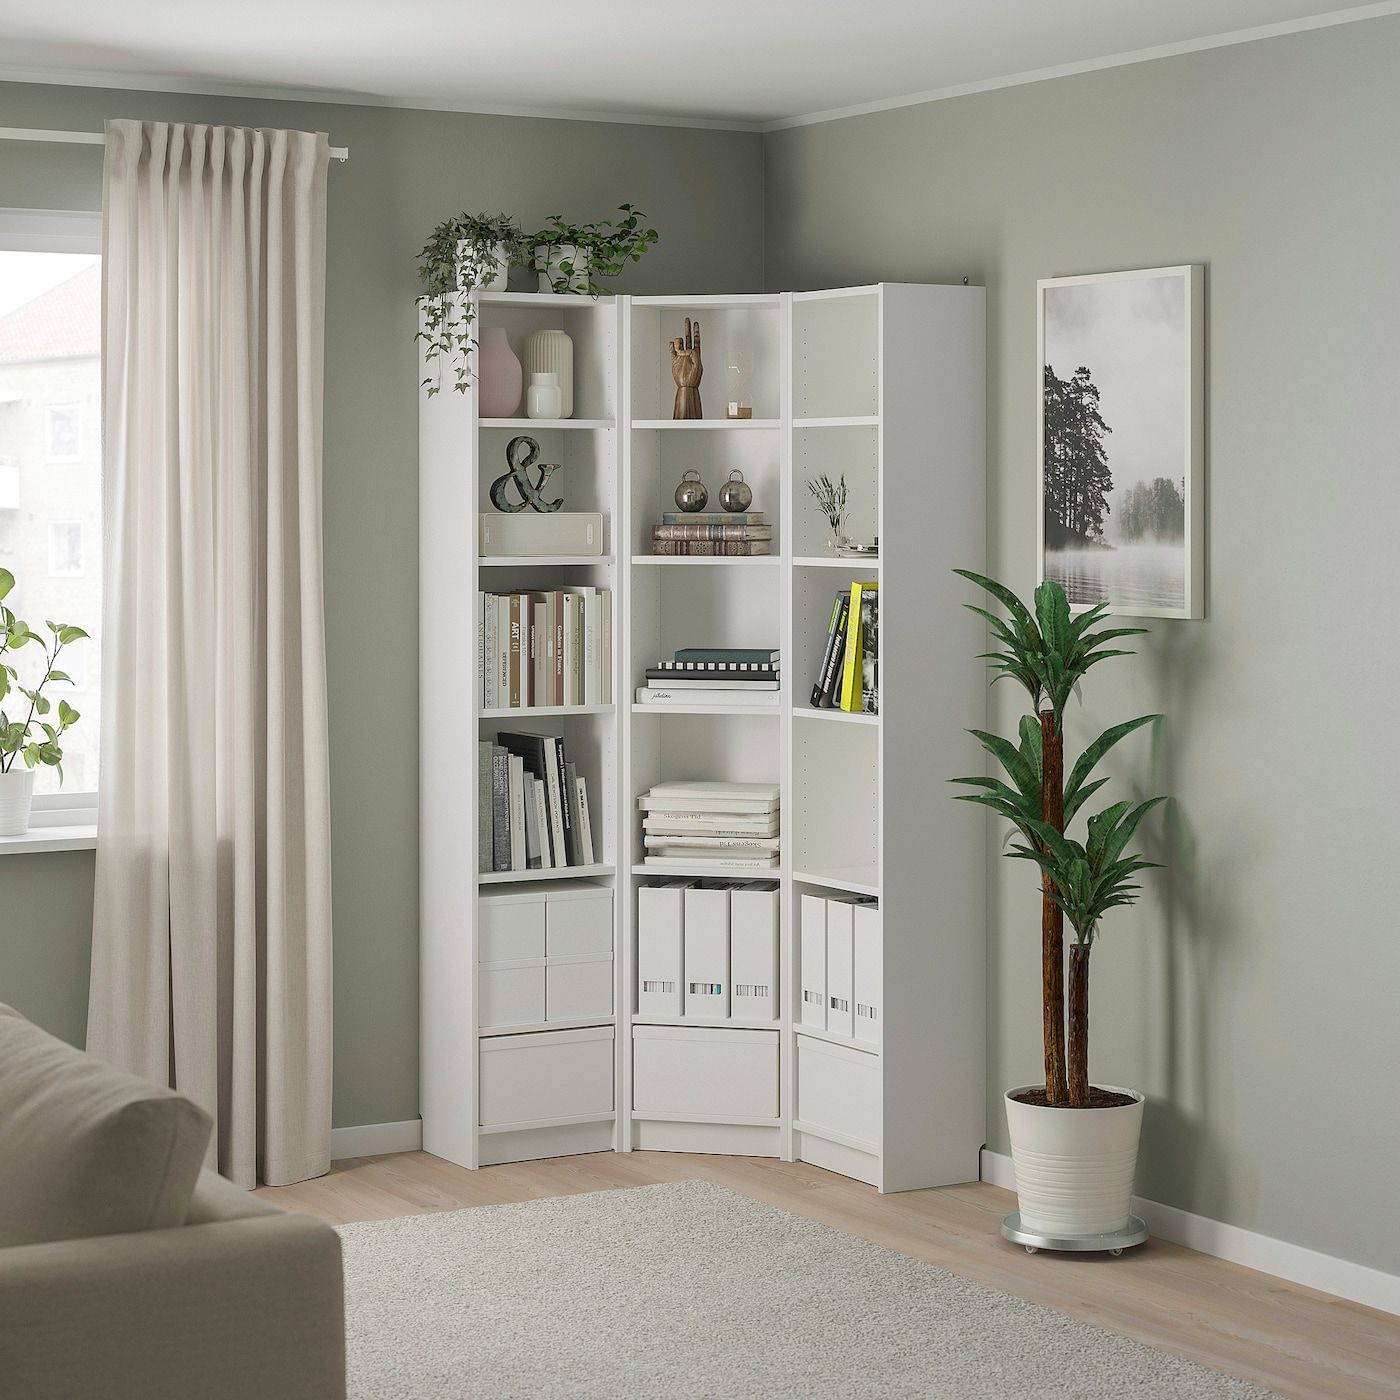 Billy Bookcase Combination/crn Solution, White, 373/8/373/8x11x791/2" – Ikea For Corner Bookcases (Photo 1 of 15)